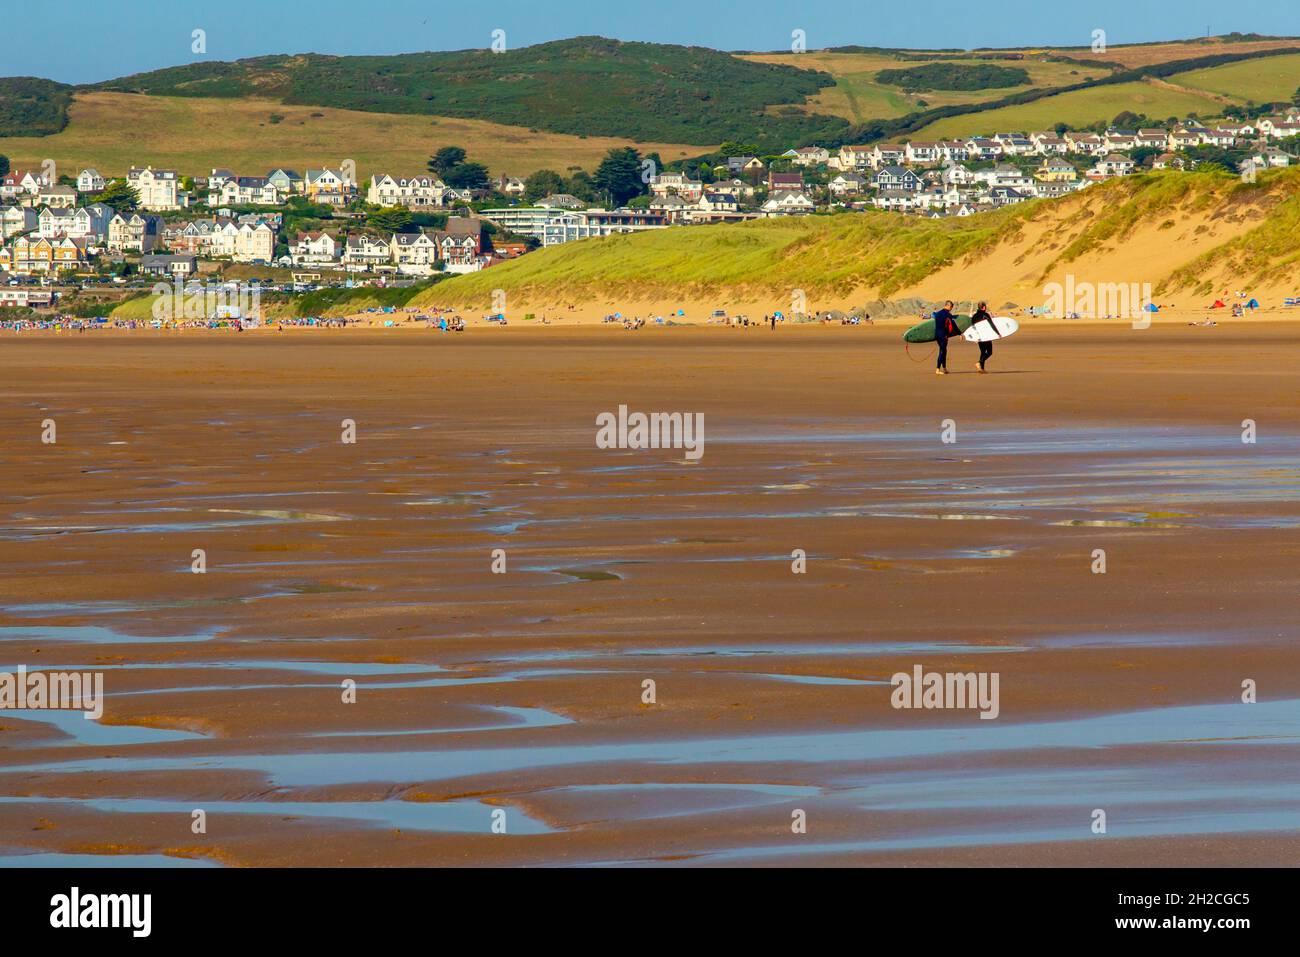 Surfers on the sandy beach at Woolacombe on the North Devon coast England UK close to the South West Coast Path. Stock Photo